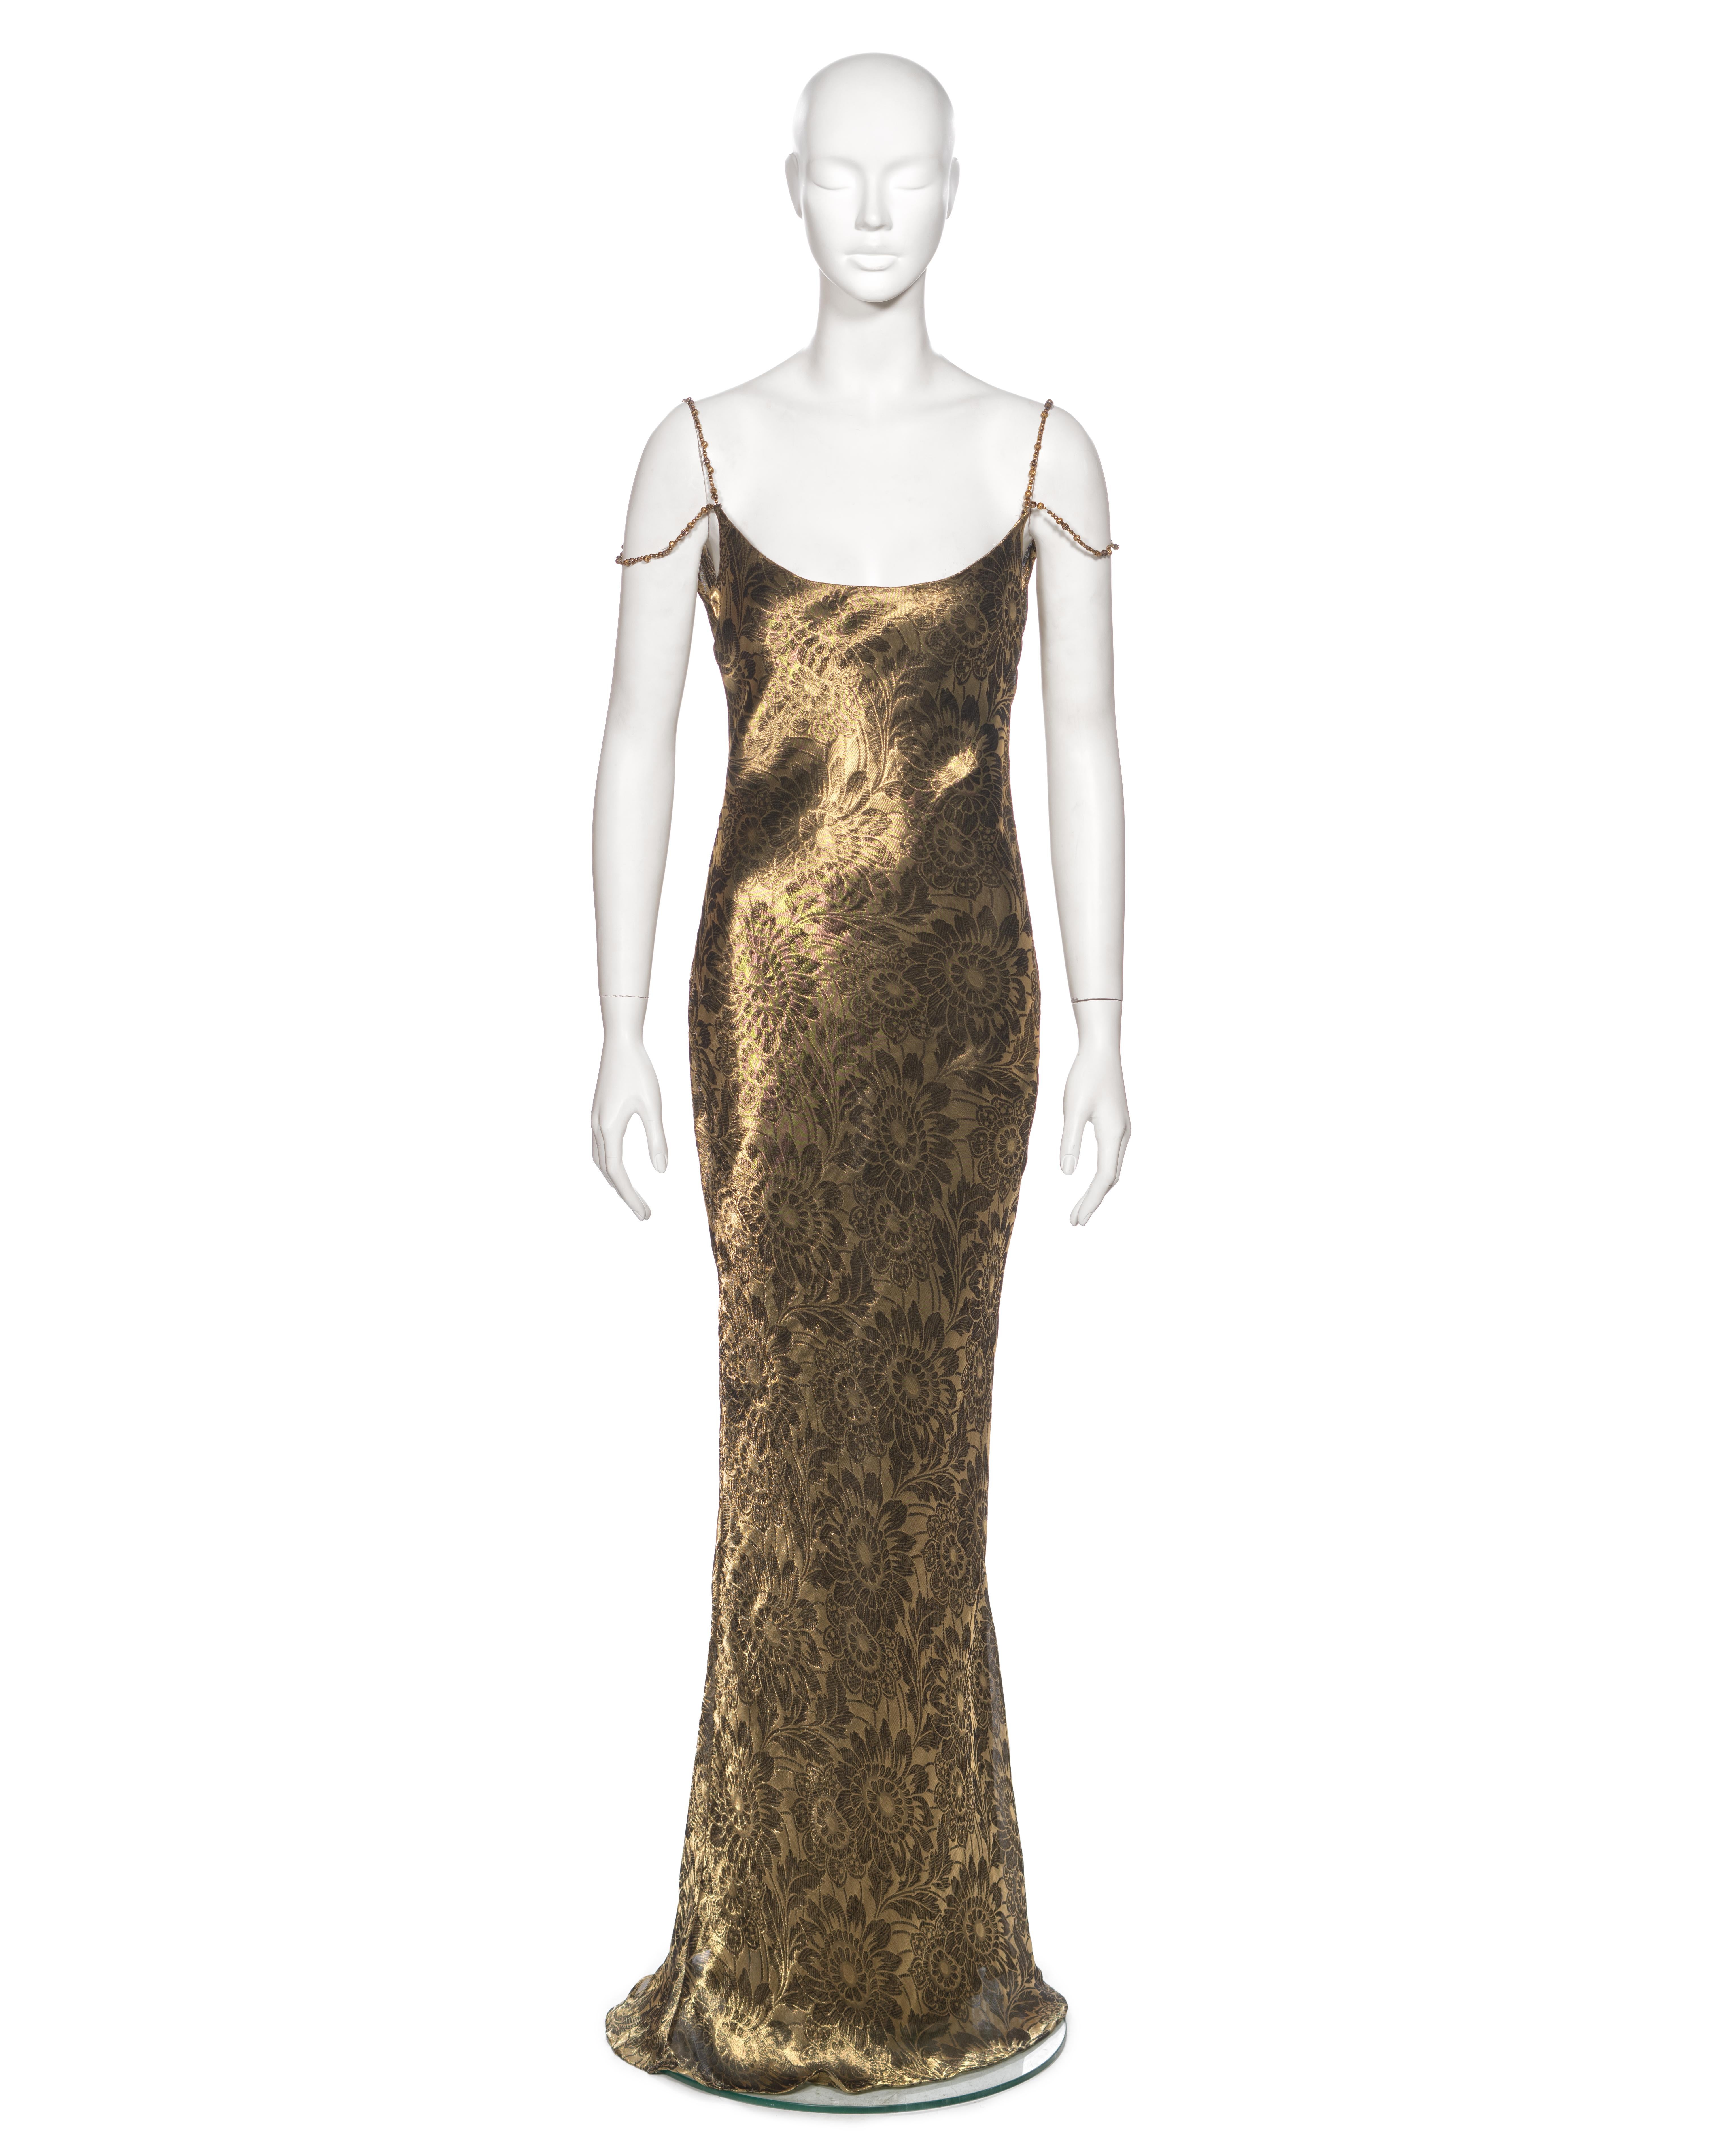 ▪ Archival Christian Dior Runway Evening Dress
▪ Creative Director: John Galliano
▪ Fall-Winter 1998
▪ Museum Grade 
▪ Crafted from a metallic antique gold tone bias-cut lurex silk damask, featuring an exquisite woven floral motif
▪ Adorned with